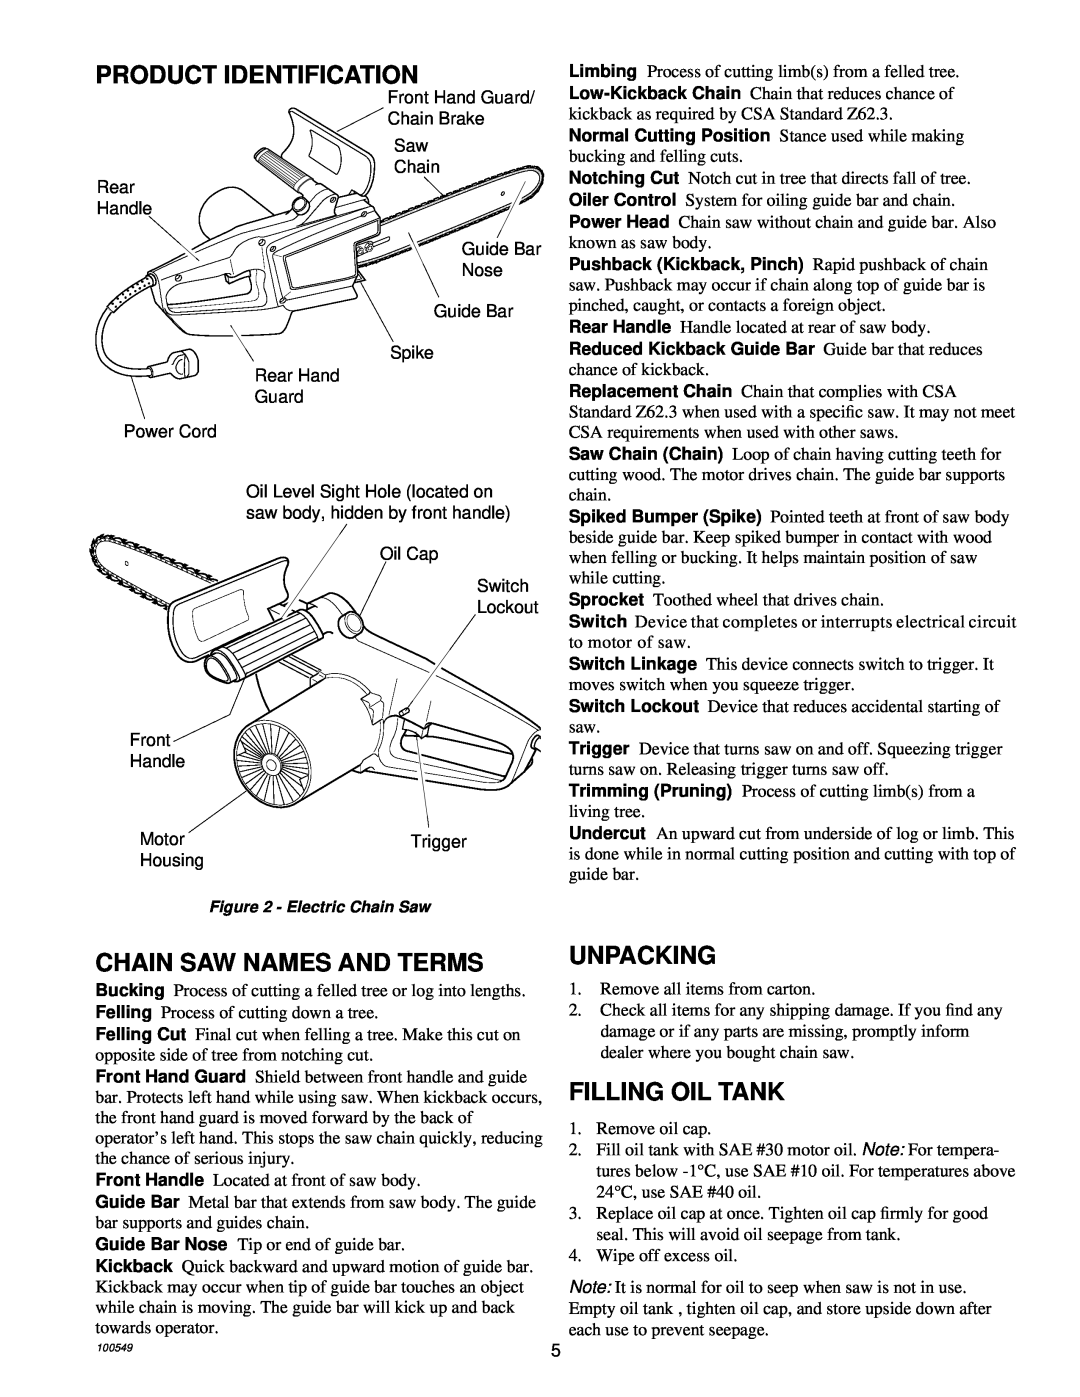 MasterCraft 100524-01, CS-120CB owner manual Product Identification, Chain Saw Names And Terms, Unpacking, Filling Oil Tank 